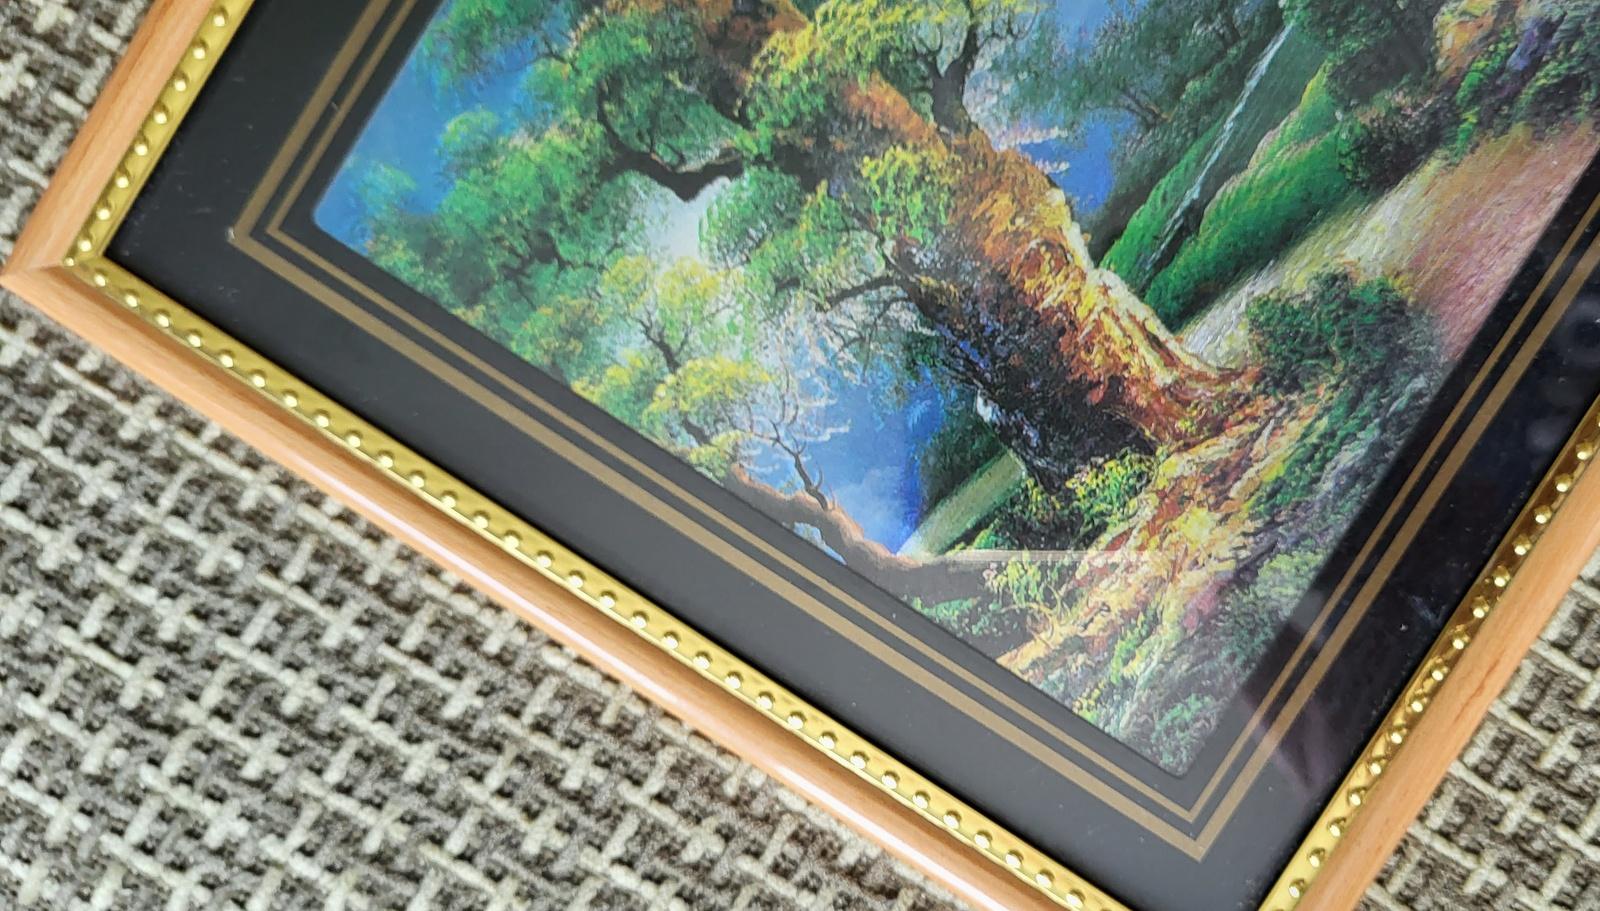 Immerse yourself in a mesmerizing visual experience with this vintage framed print from the 1990s. Featuring a shiny image that changes colors depending on the lighting, this captivating piece adds a touch of magic to any space.

The print is